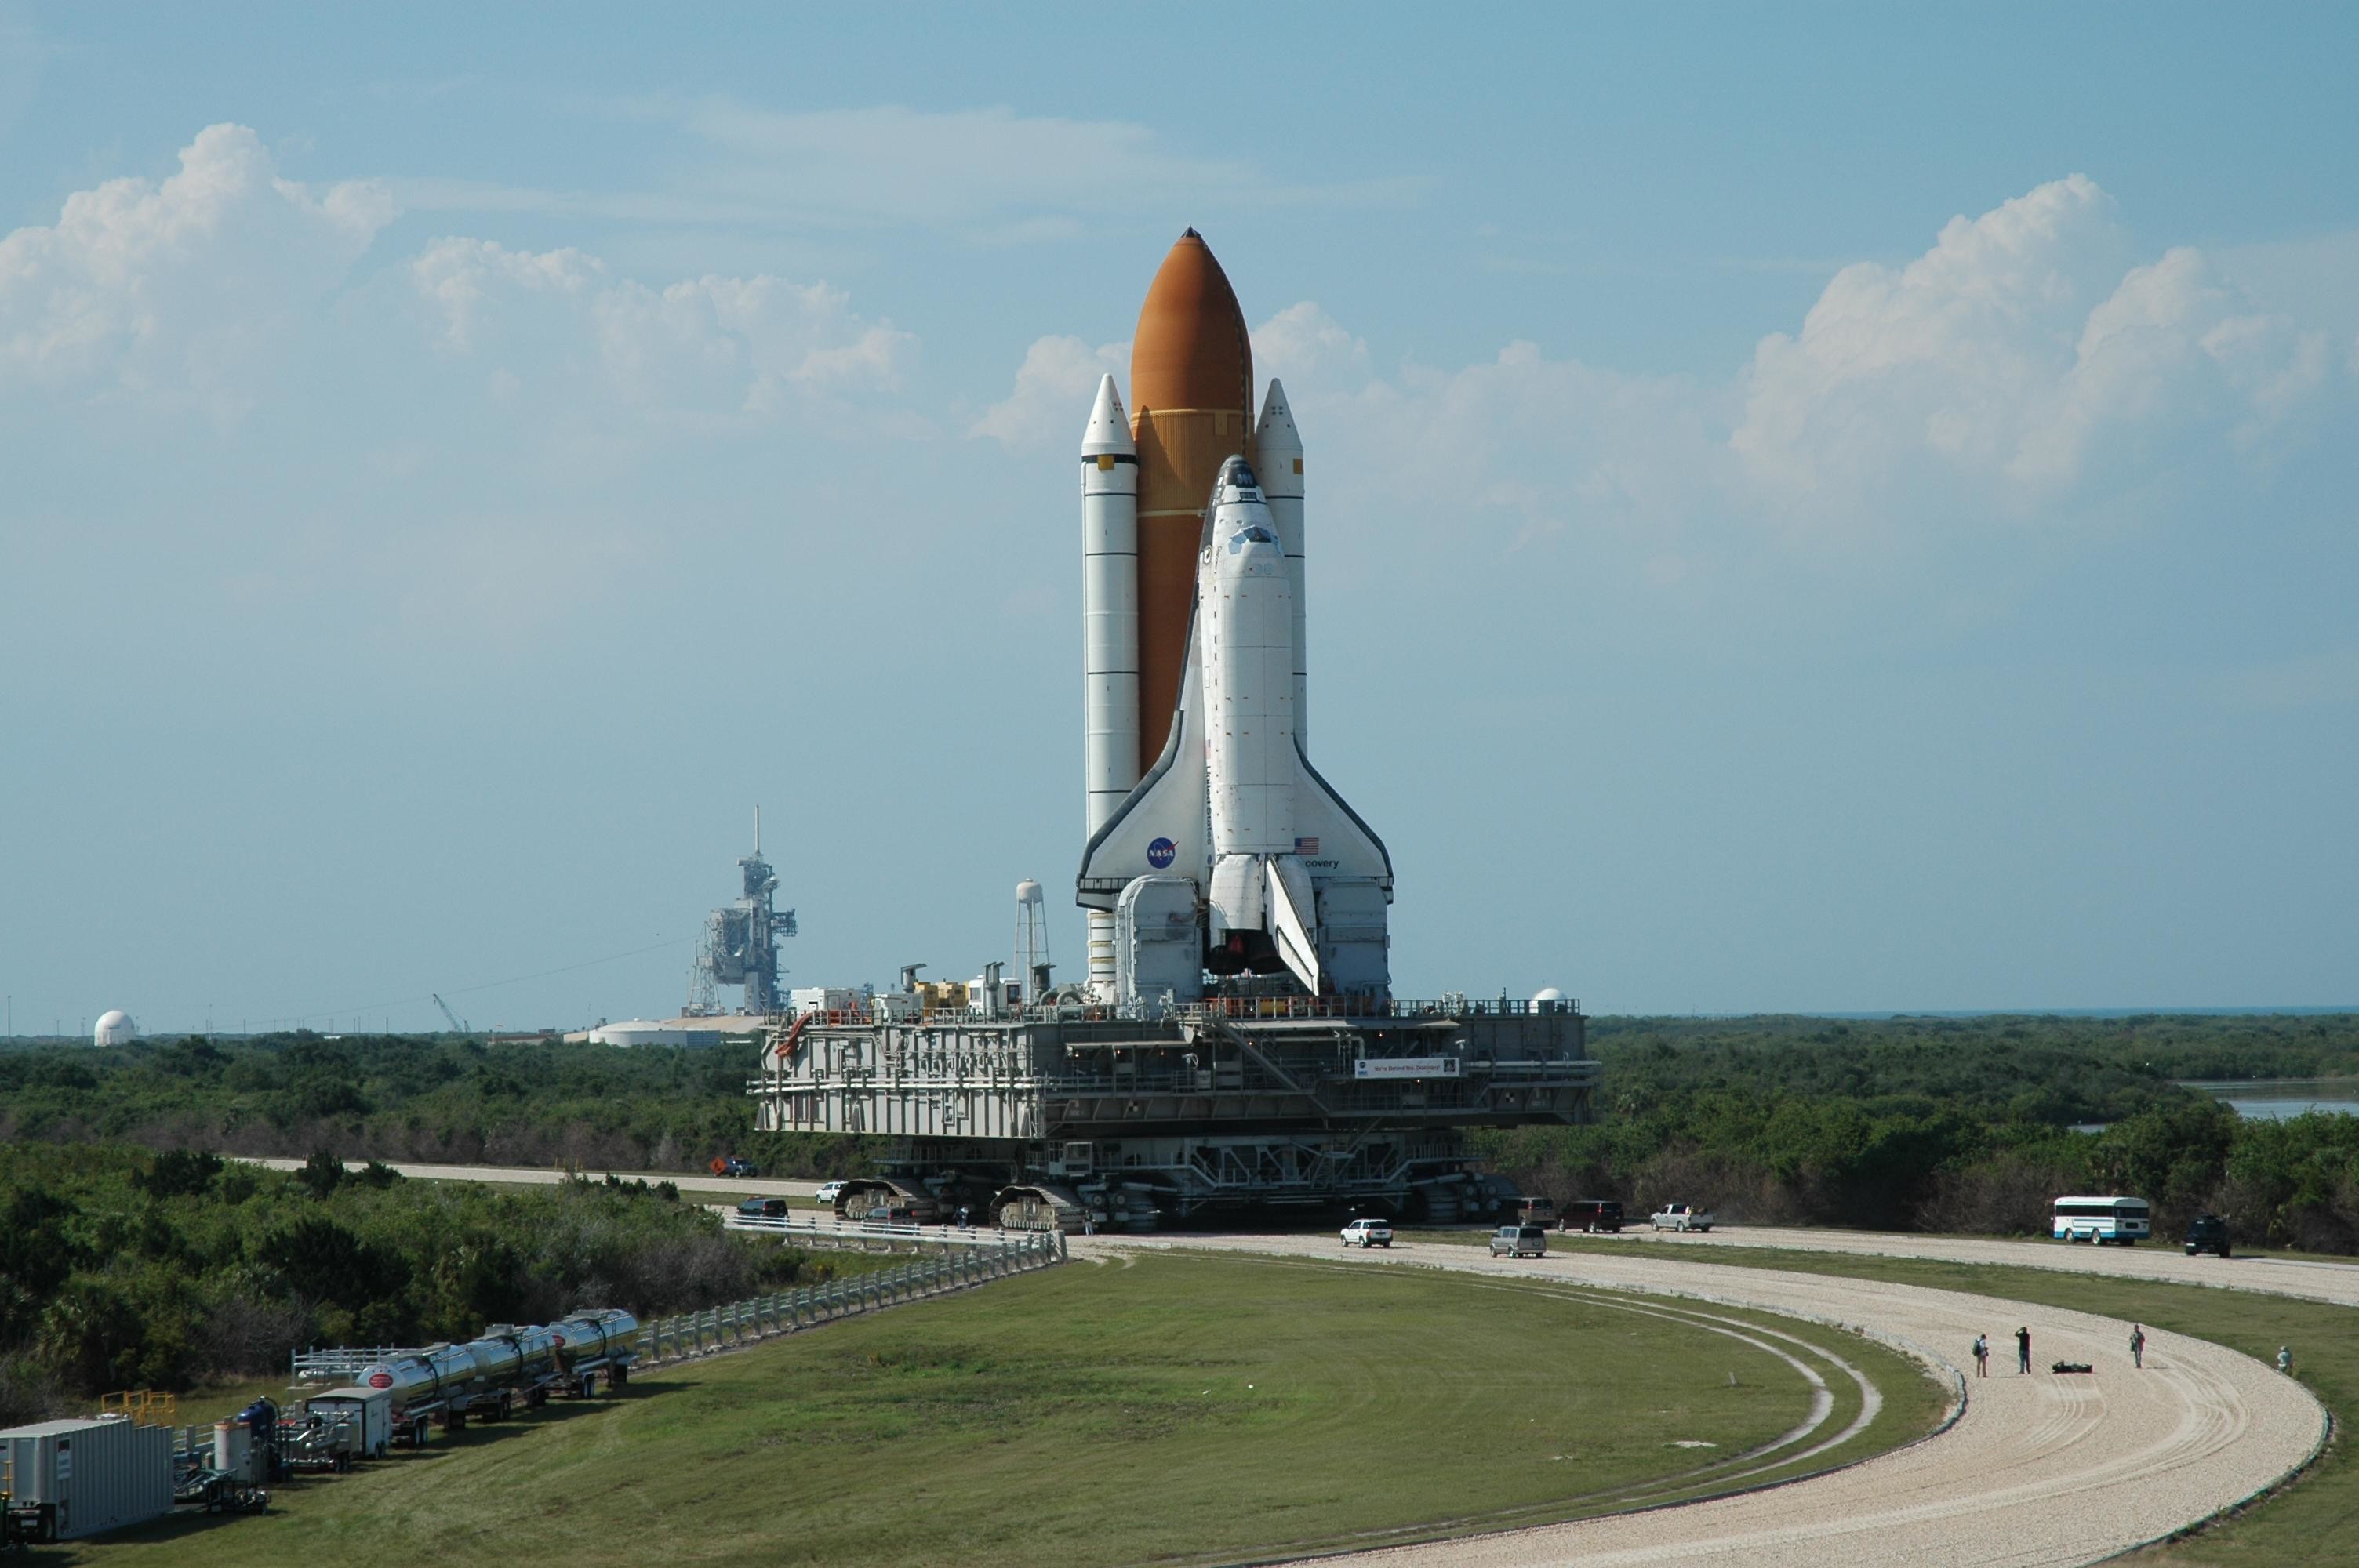 3008x2000 29 Space Shuttle Discovery HD Wallpapers | Backgrounds - Wallpaper Abyss